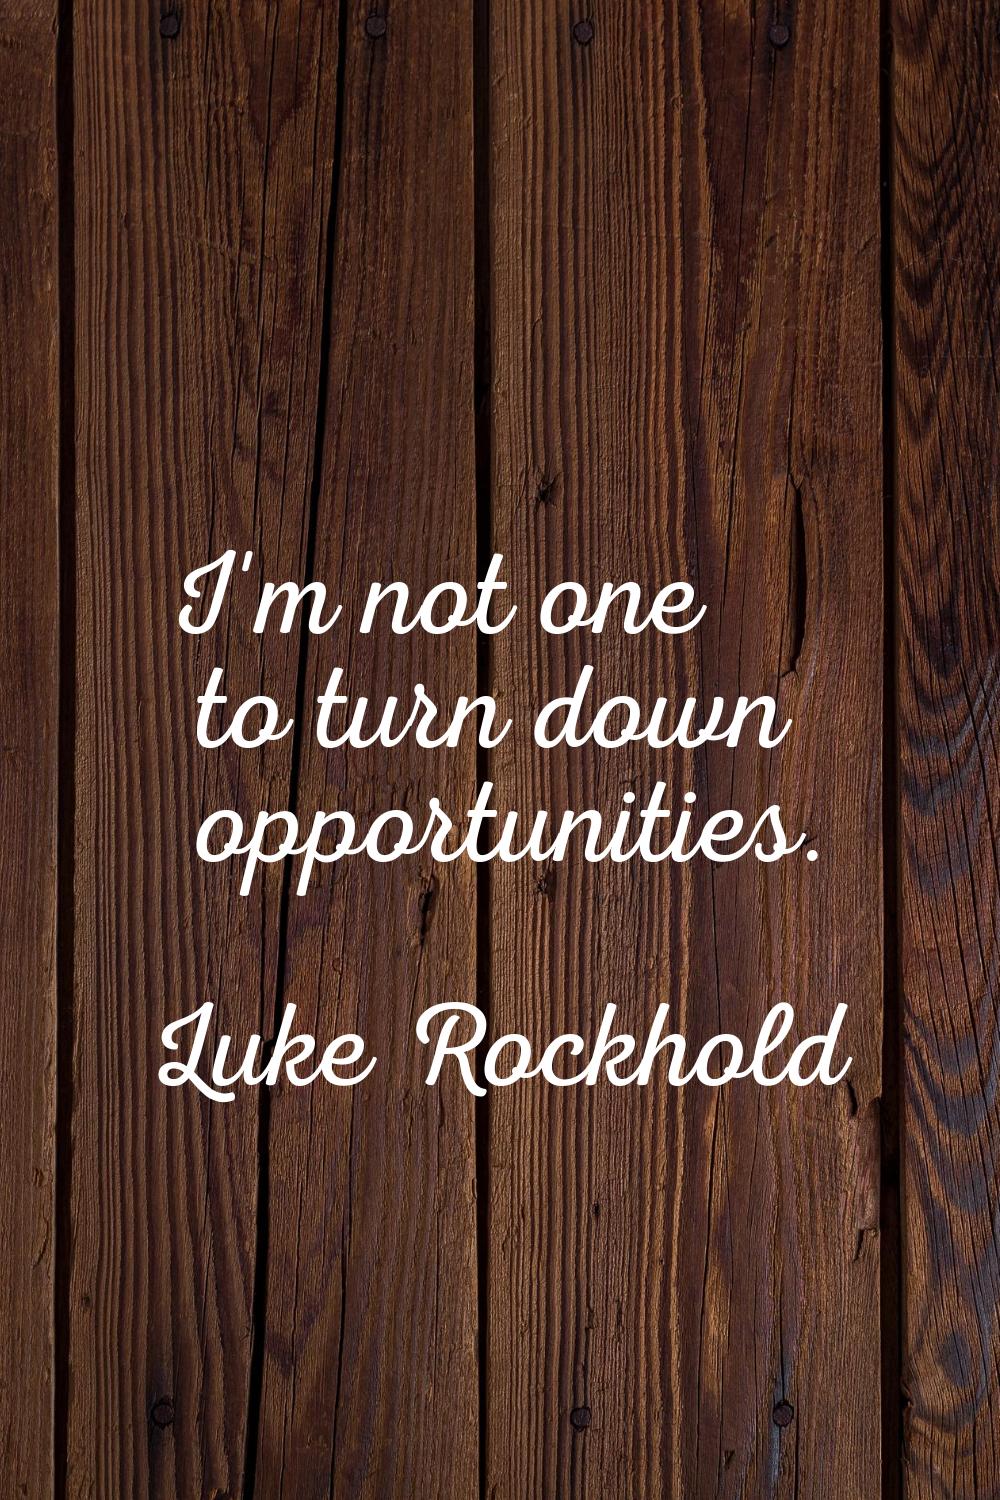 I'm not one to turn down opportunities.